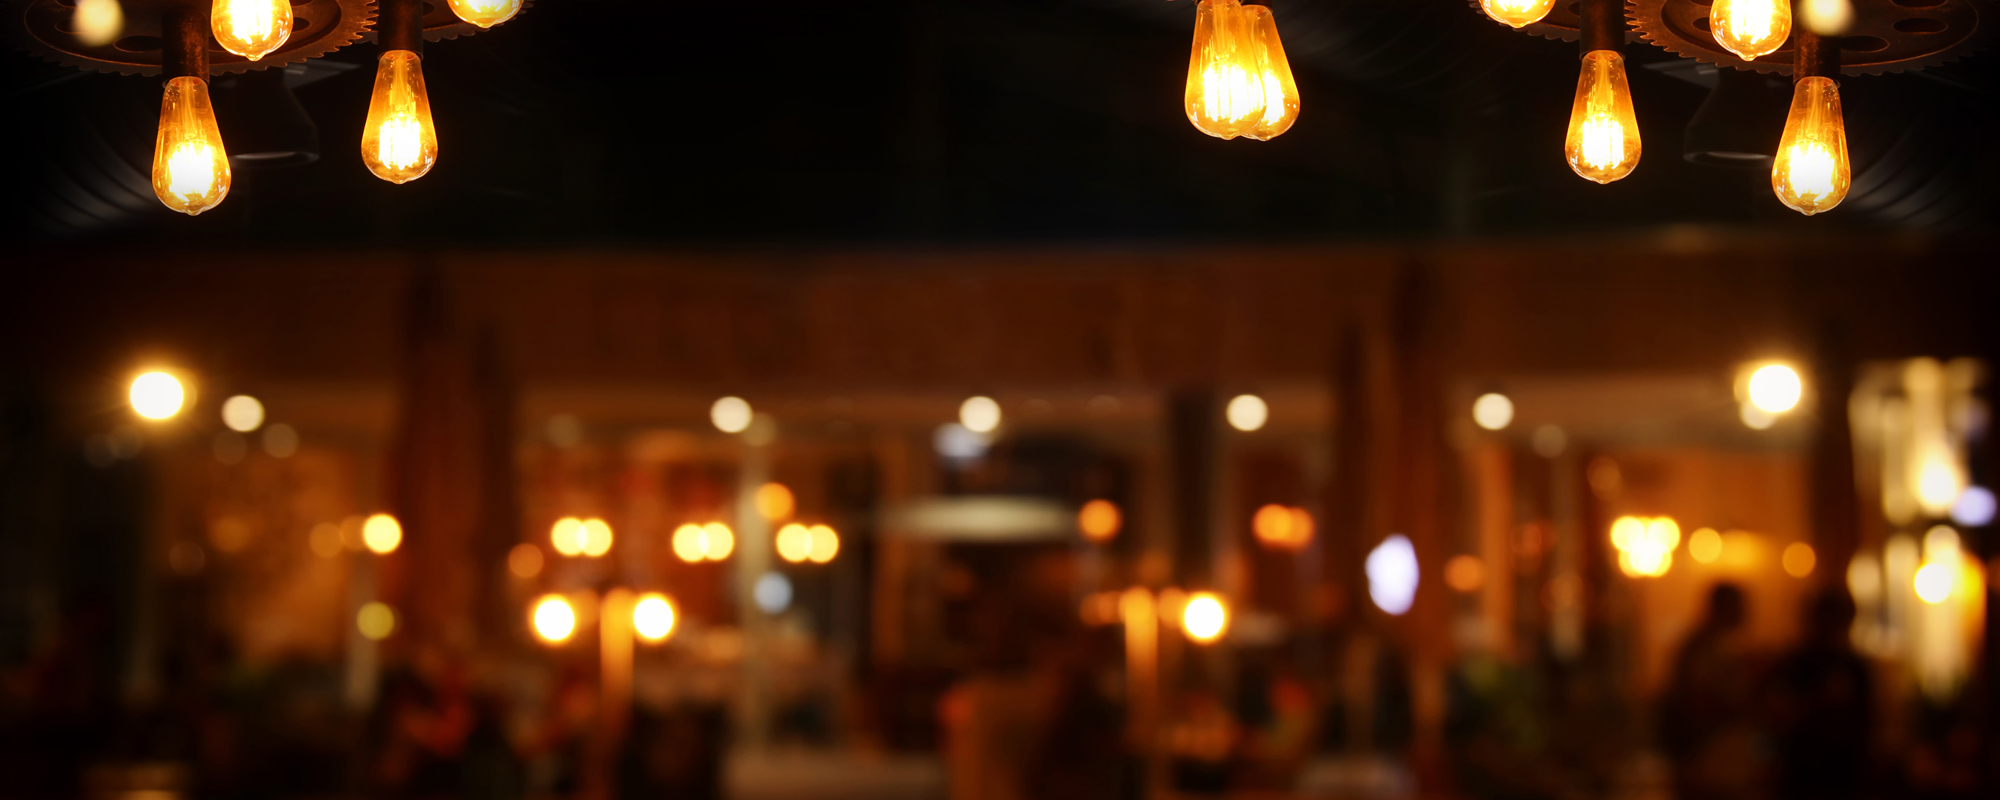 Image Of Wooden Table In Front Of Abstract Blurred Restaurant Lights Background.